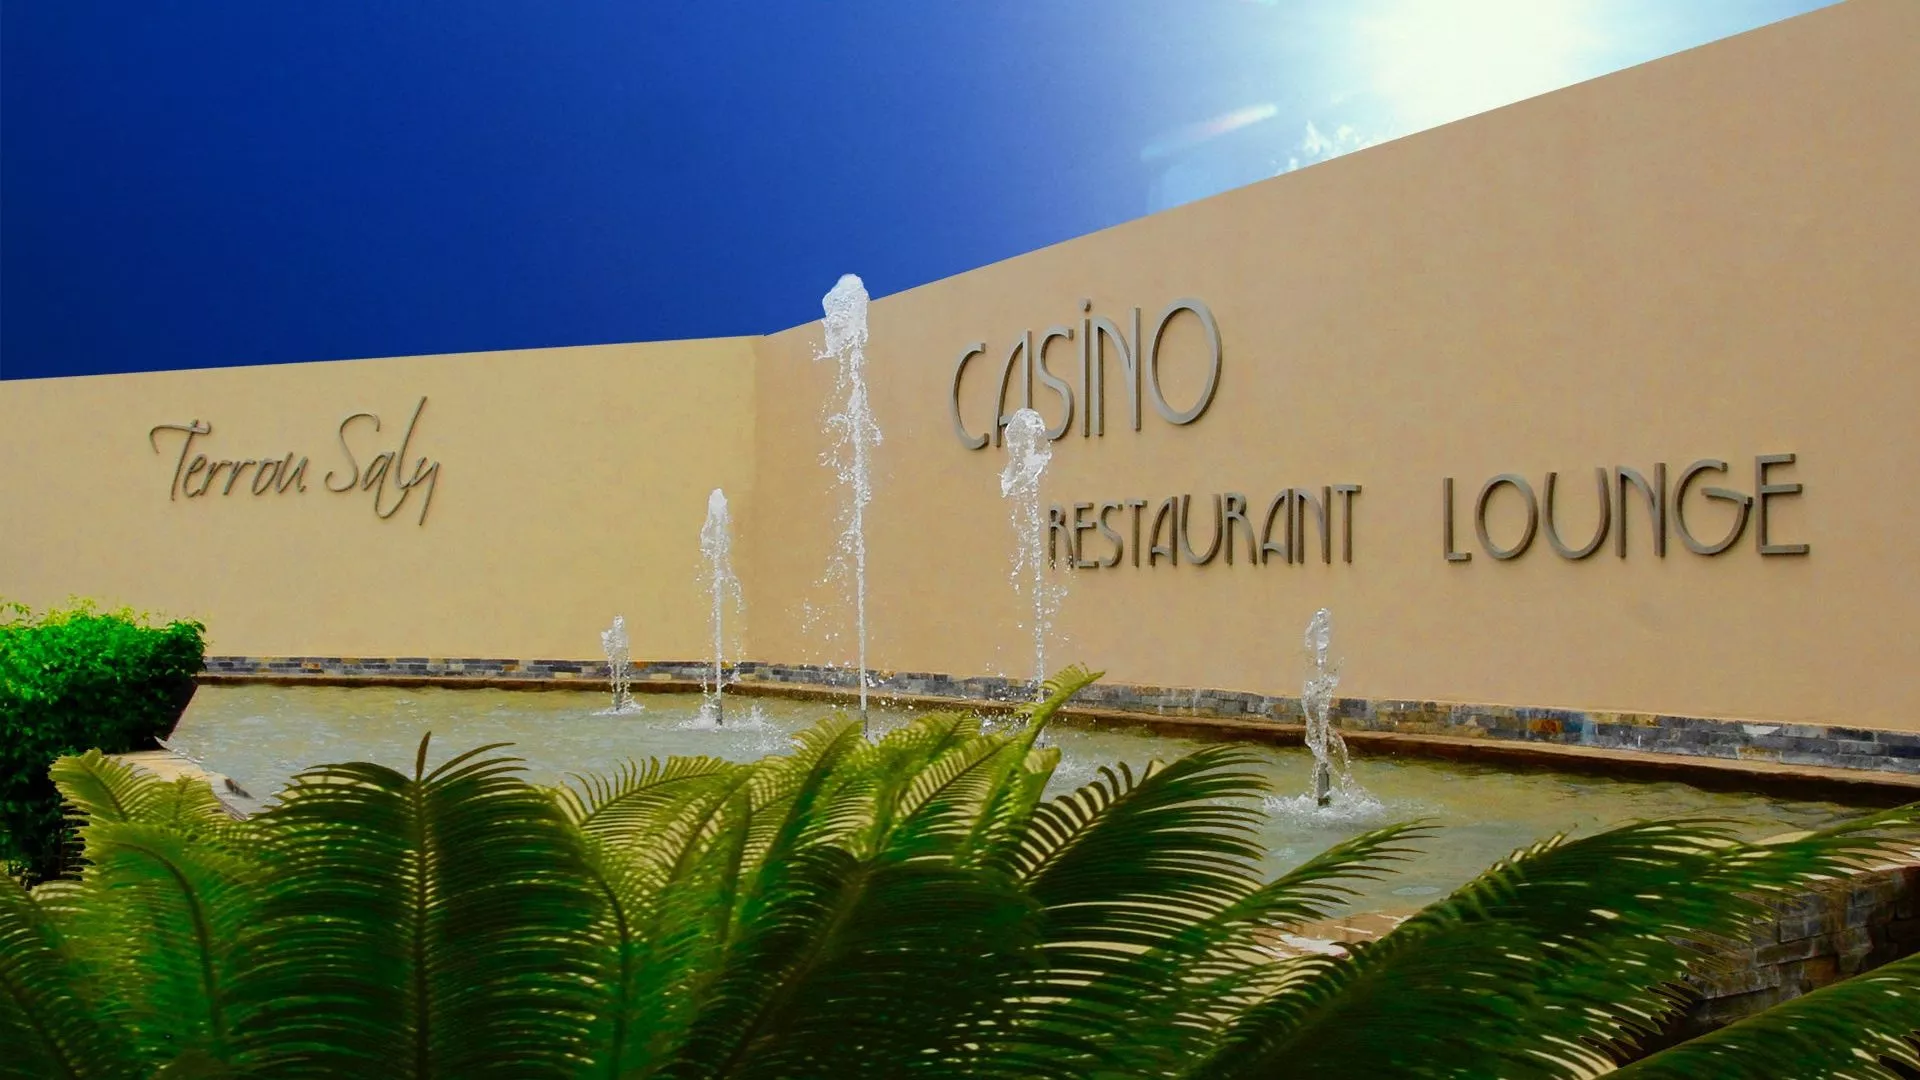 Casino Terrou Saly in Senegal, Africa | Casinos,Restaurants,Lounges - Rated 3.7